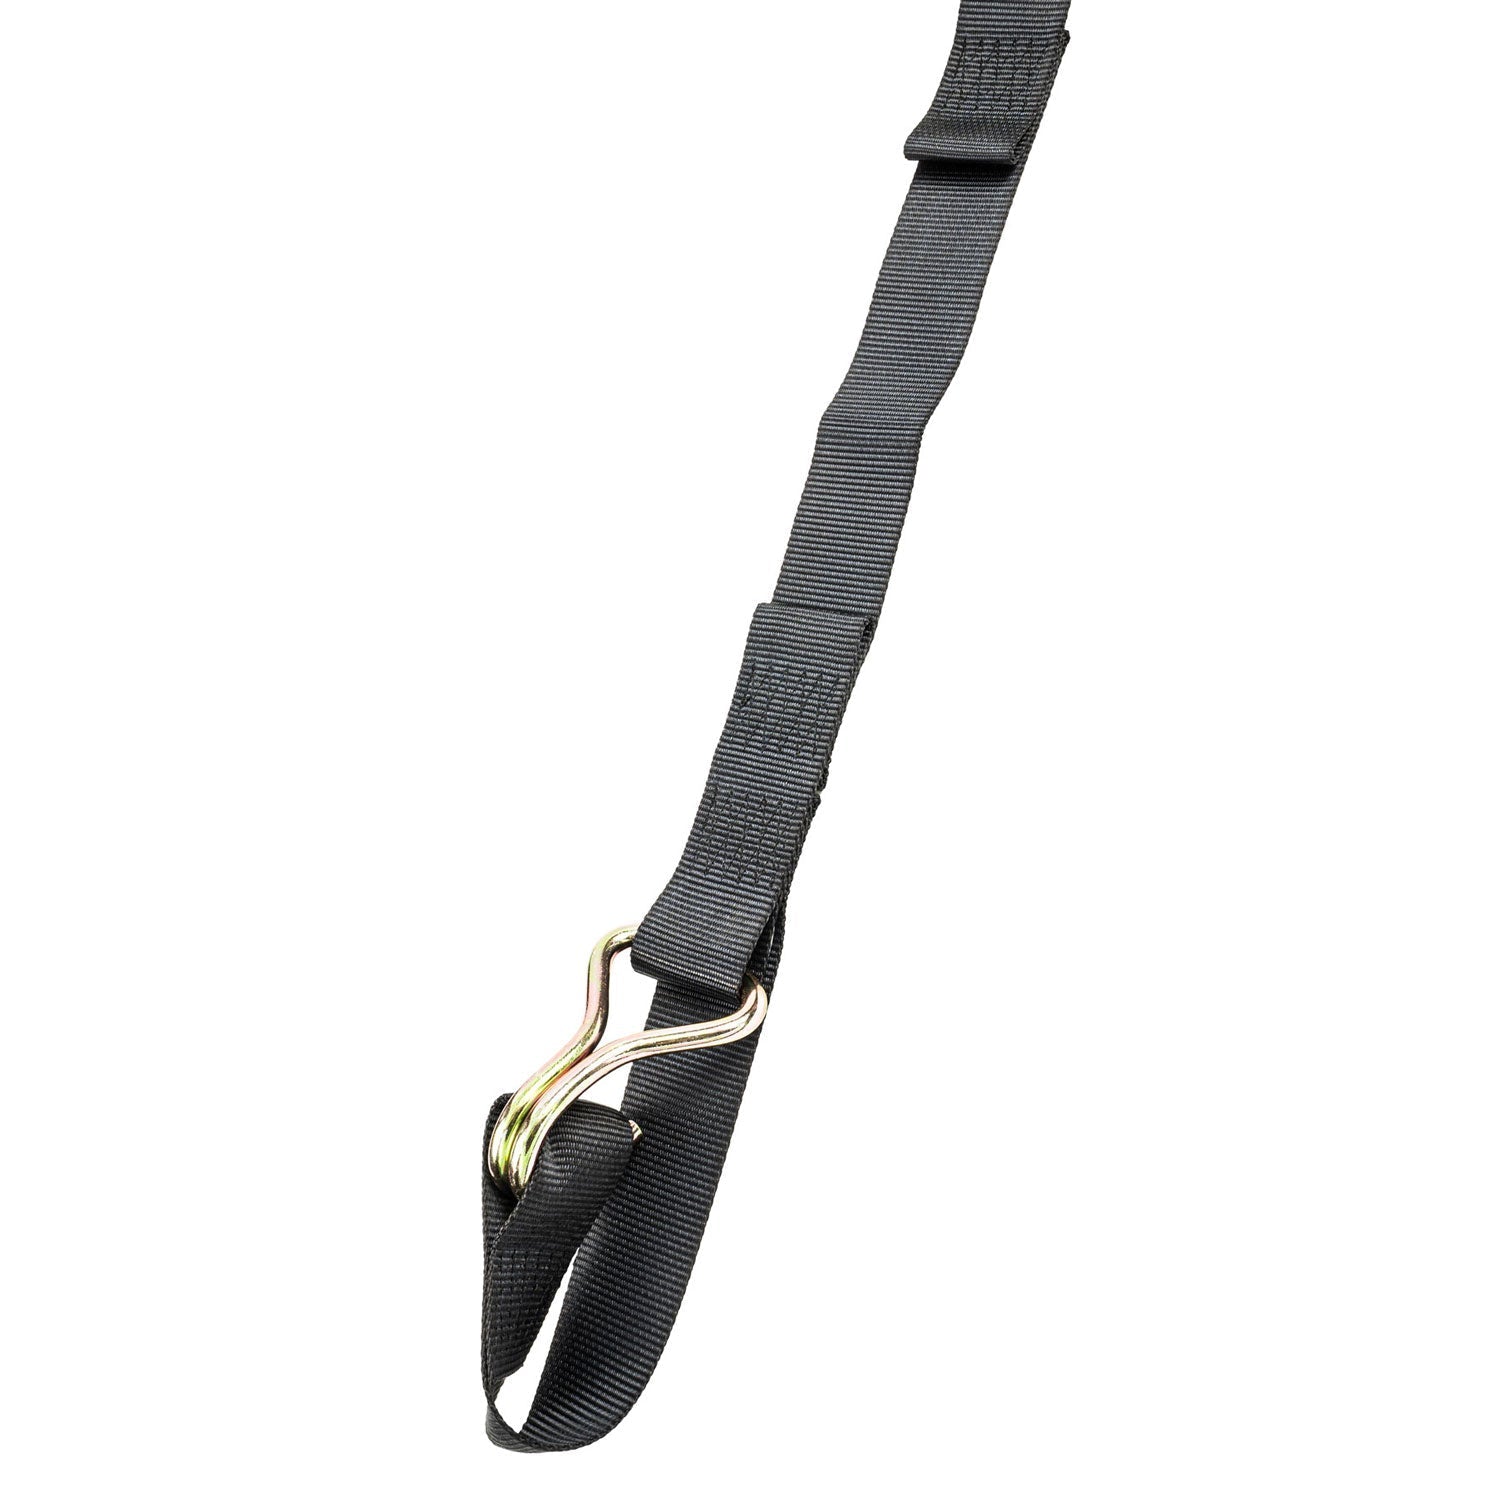 18ft x 2in ANCHOR STRAPS Ratchet Strap: 2000lb WLL, 6,000lb Break Strength - The Perfect Bungee & ShockStrap Tie Downs